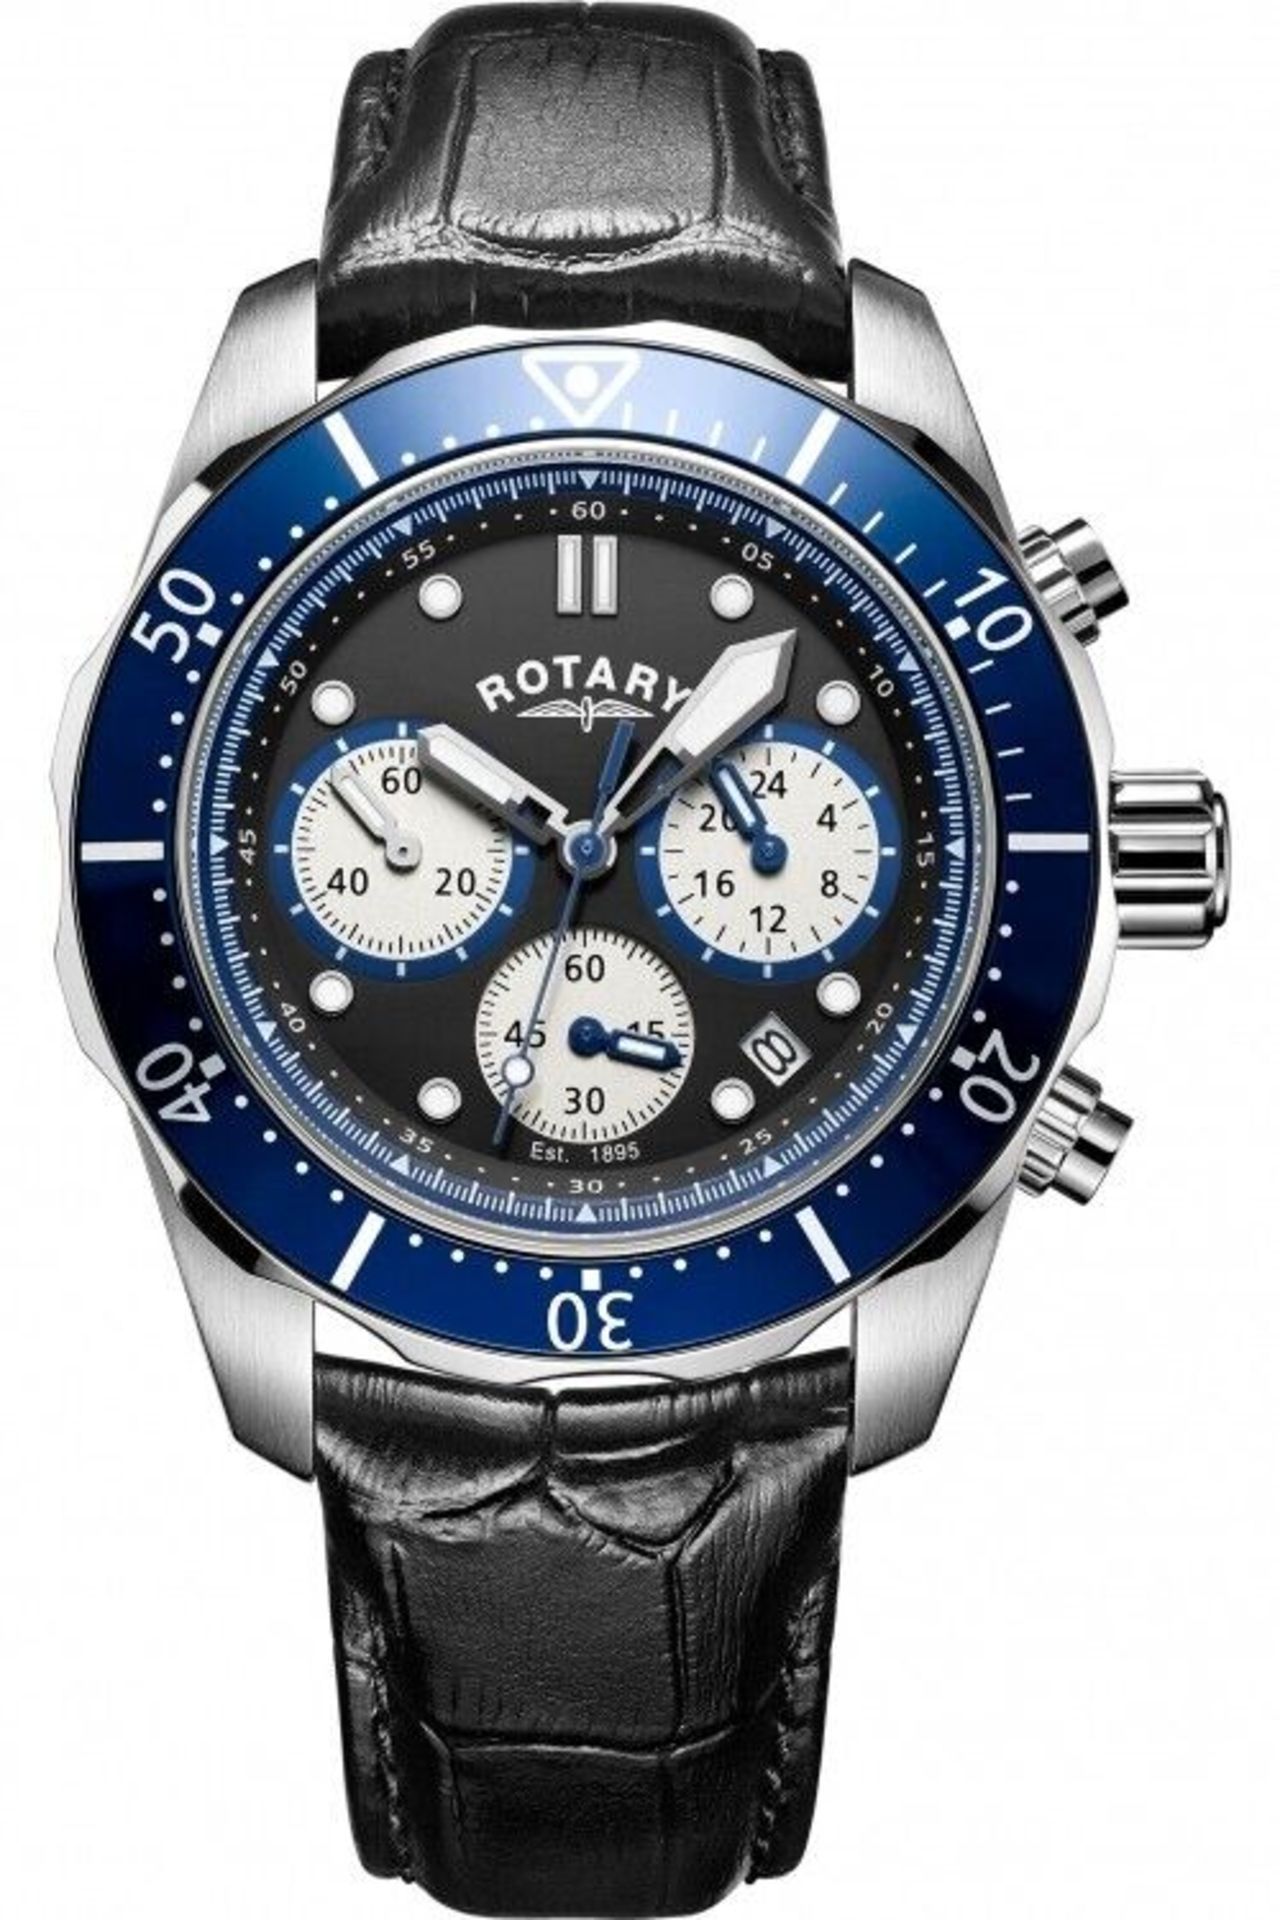 2x NEW & BOXED ROTARY Mens Chronograph Watch Blue Bezel Black Leather Strap GS00092/04. RRP £199